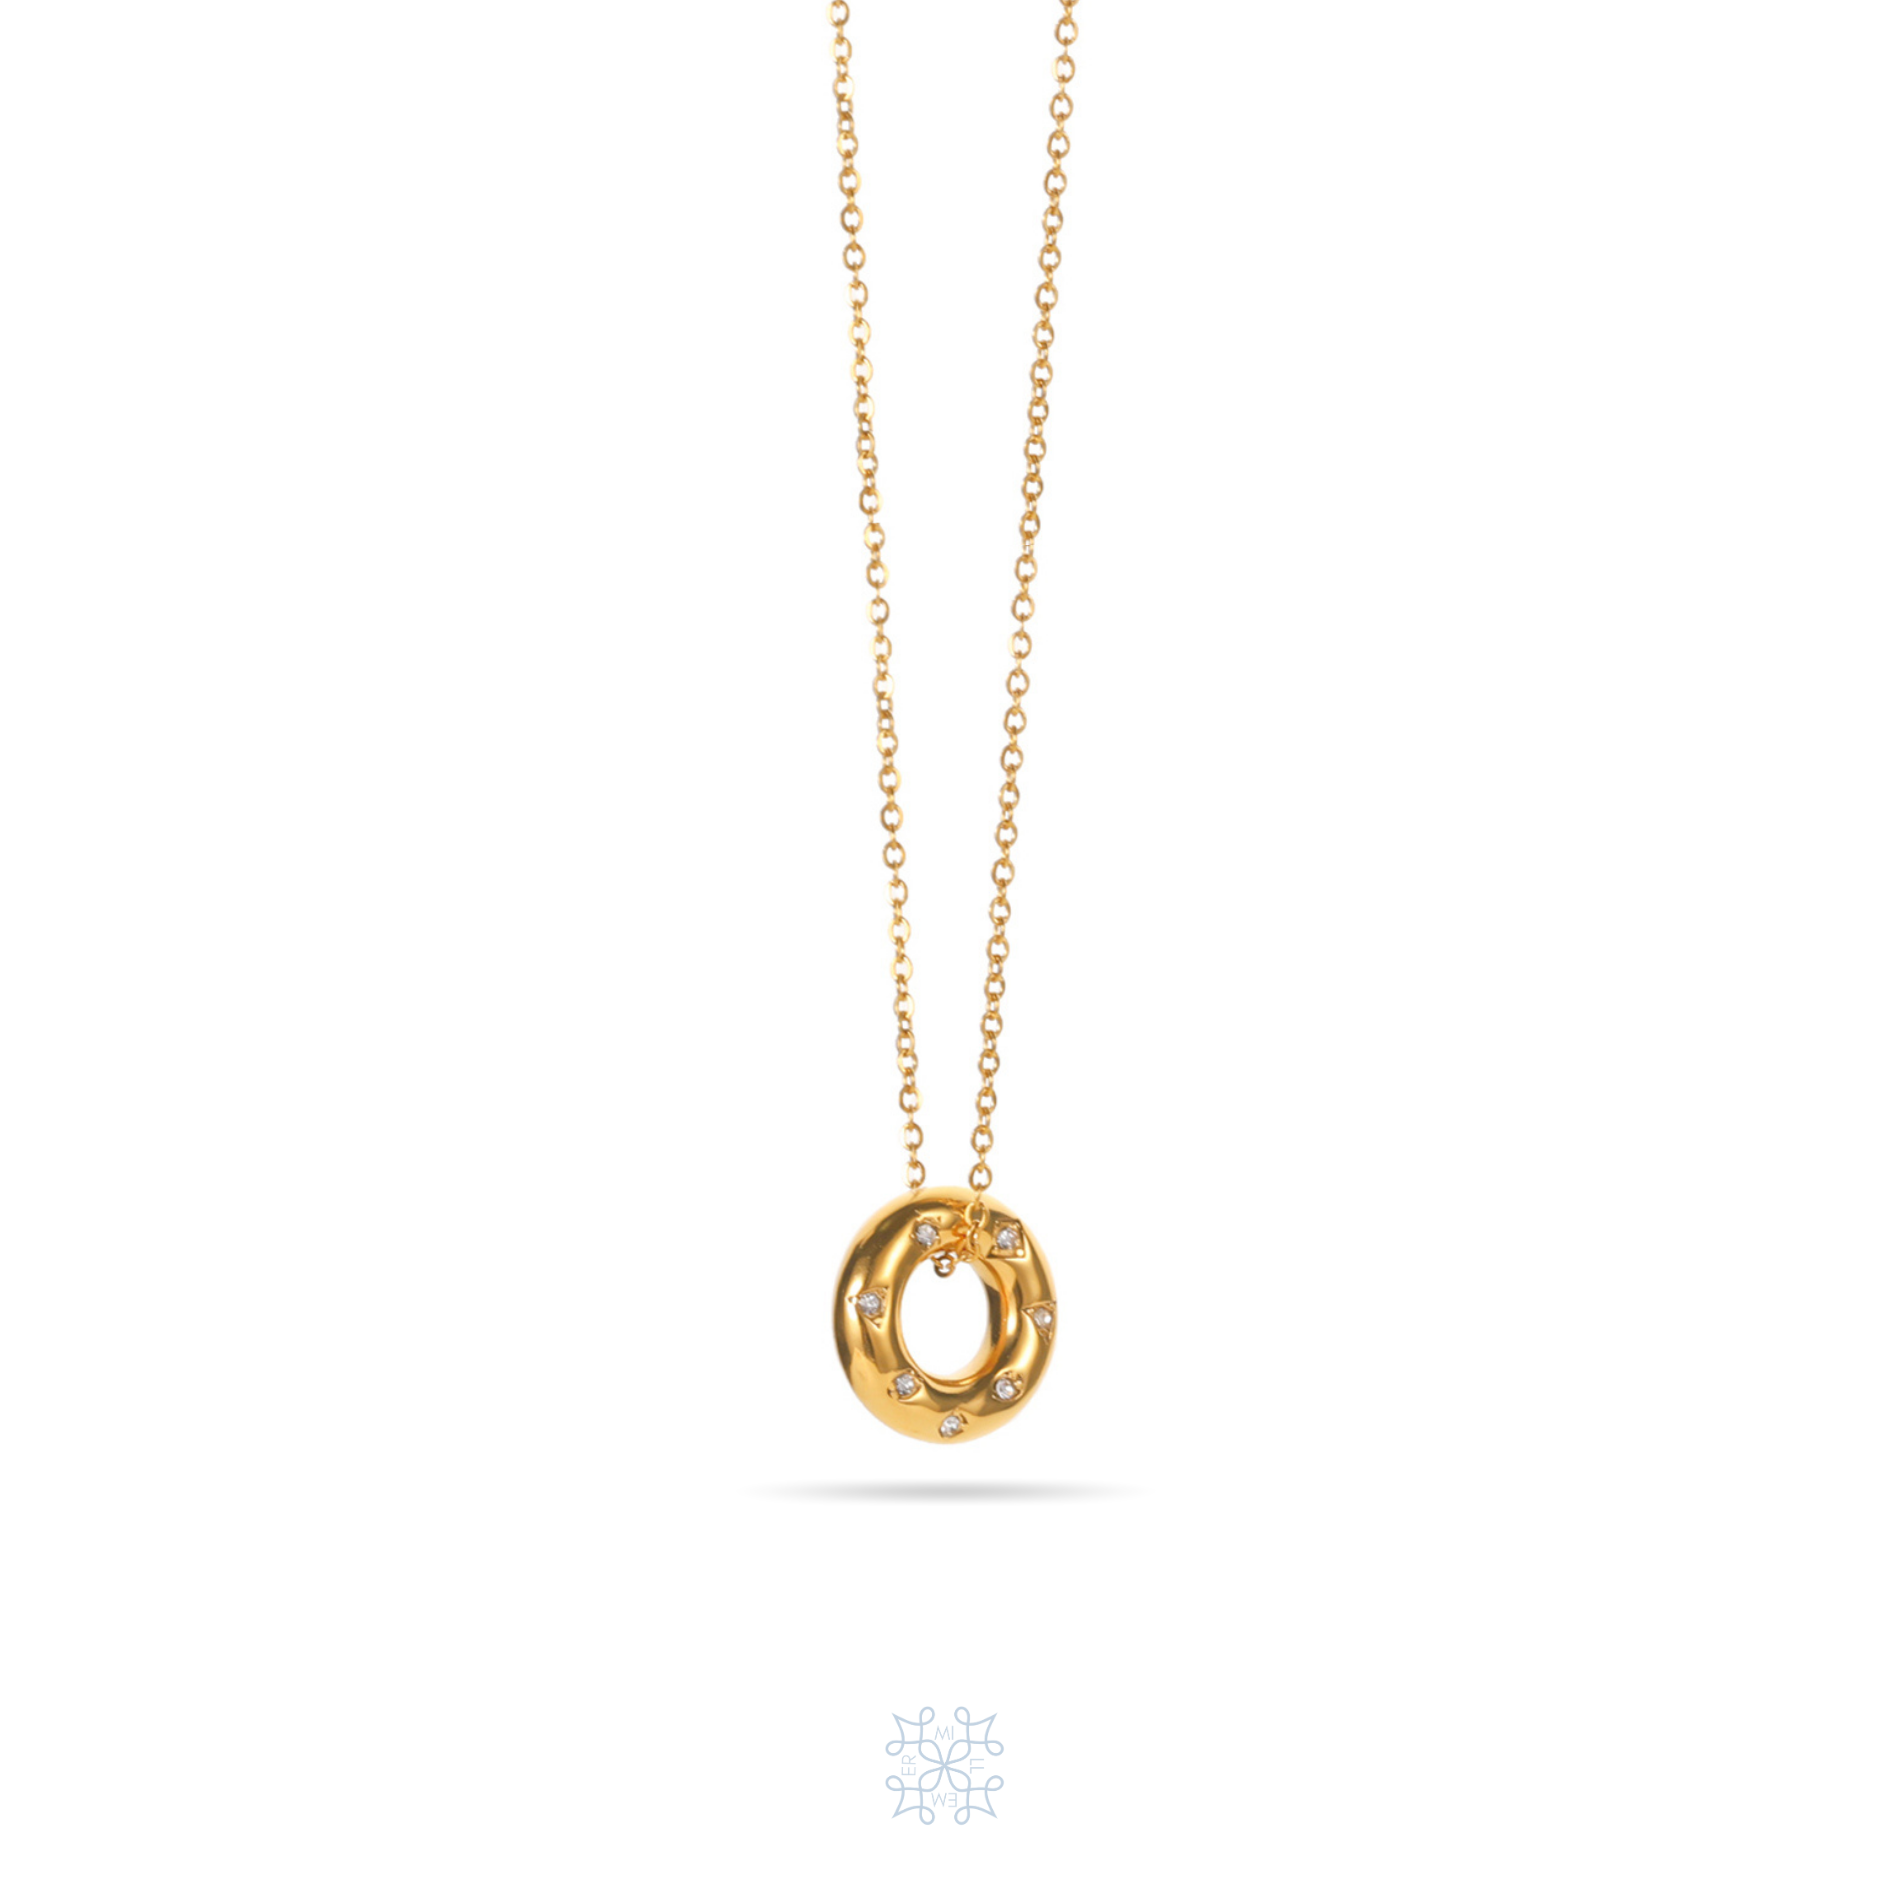 Gold chain necklace with a circle pendant in the shape of a donut with zircons on top of it. Donut zircon pendant gold necklace 